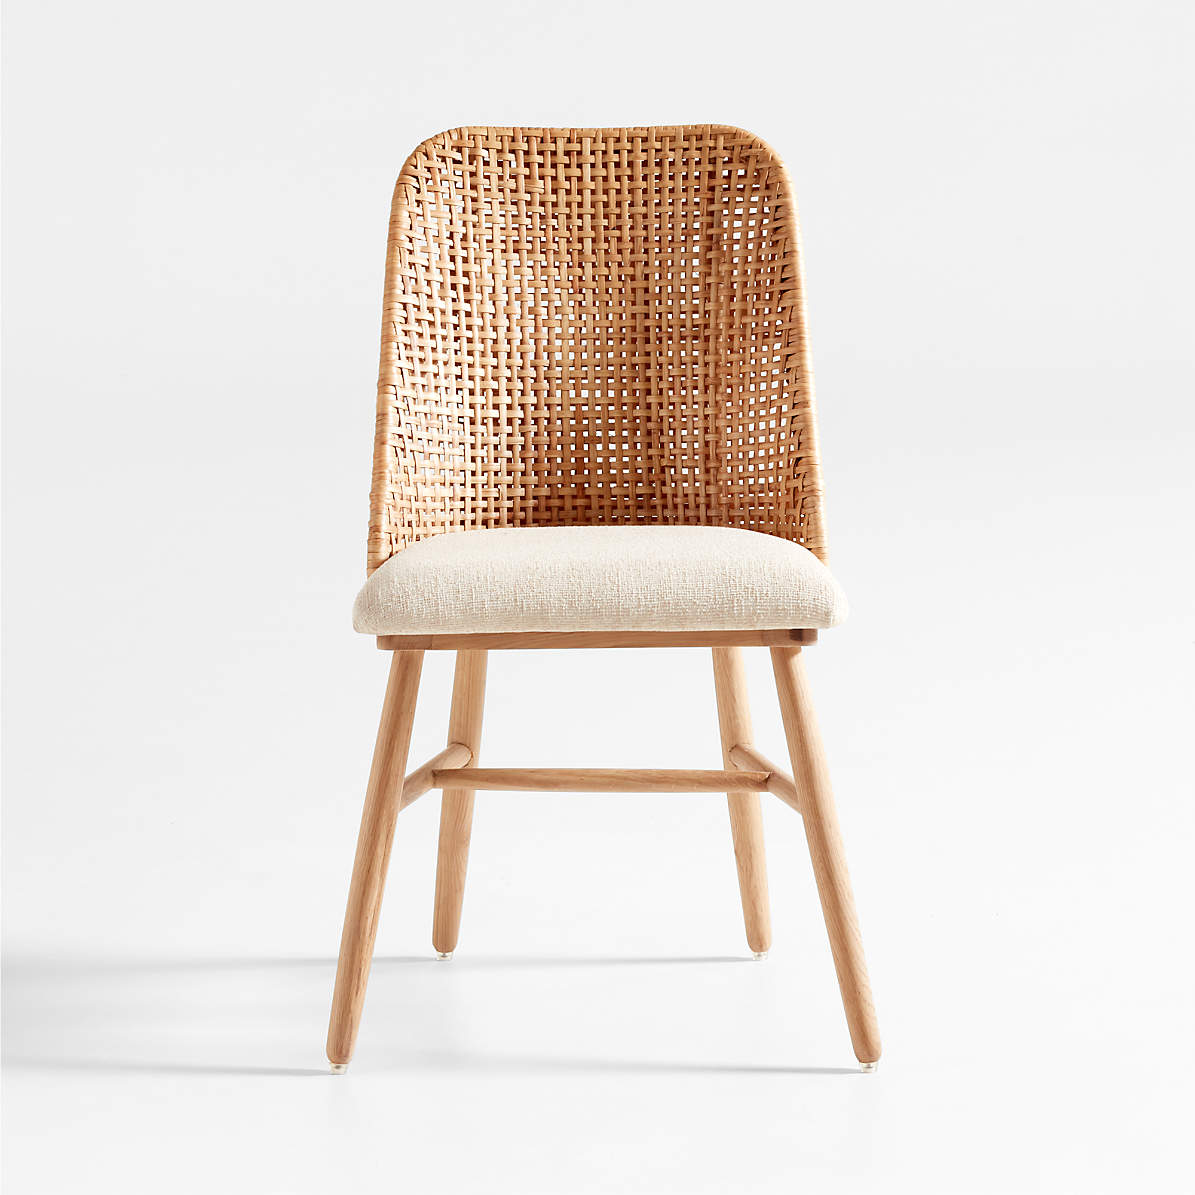 Chronisch Verdachte Pigment Astrid Upholstered Oak Wood and Rattan Dining Chair with Performance Fabric  + Reviews | Crate & Barrel